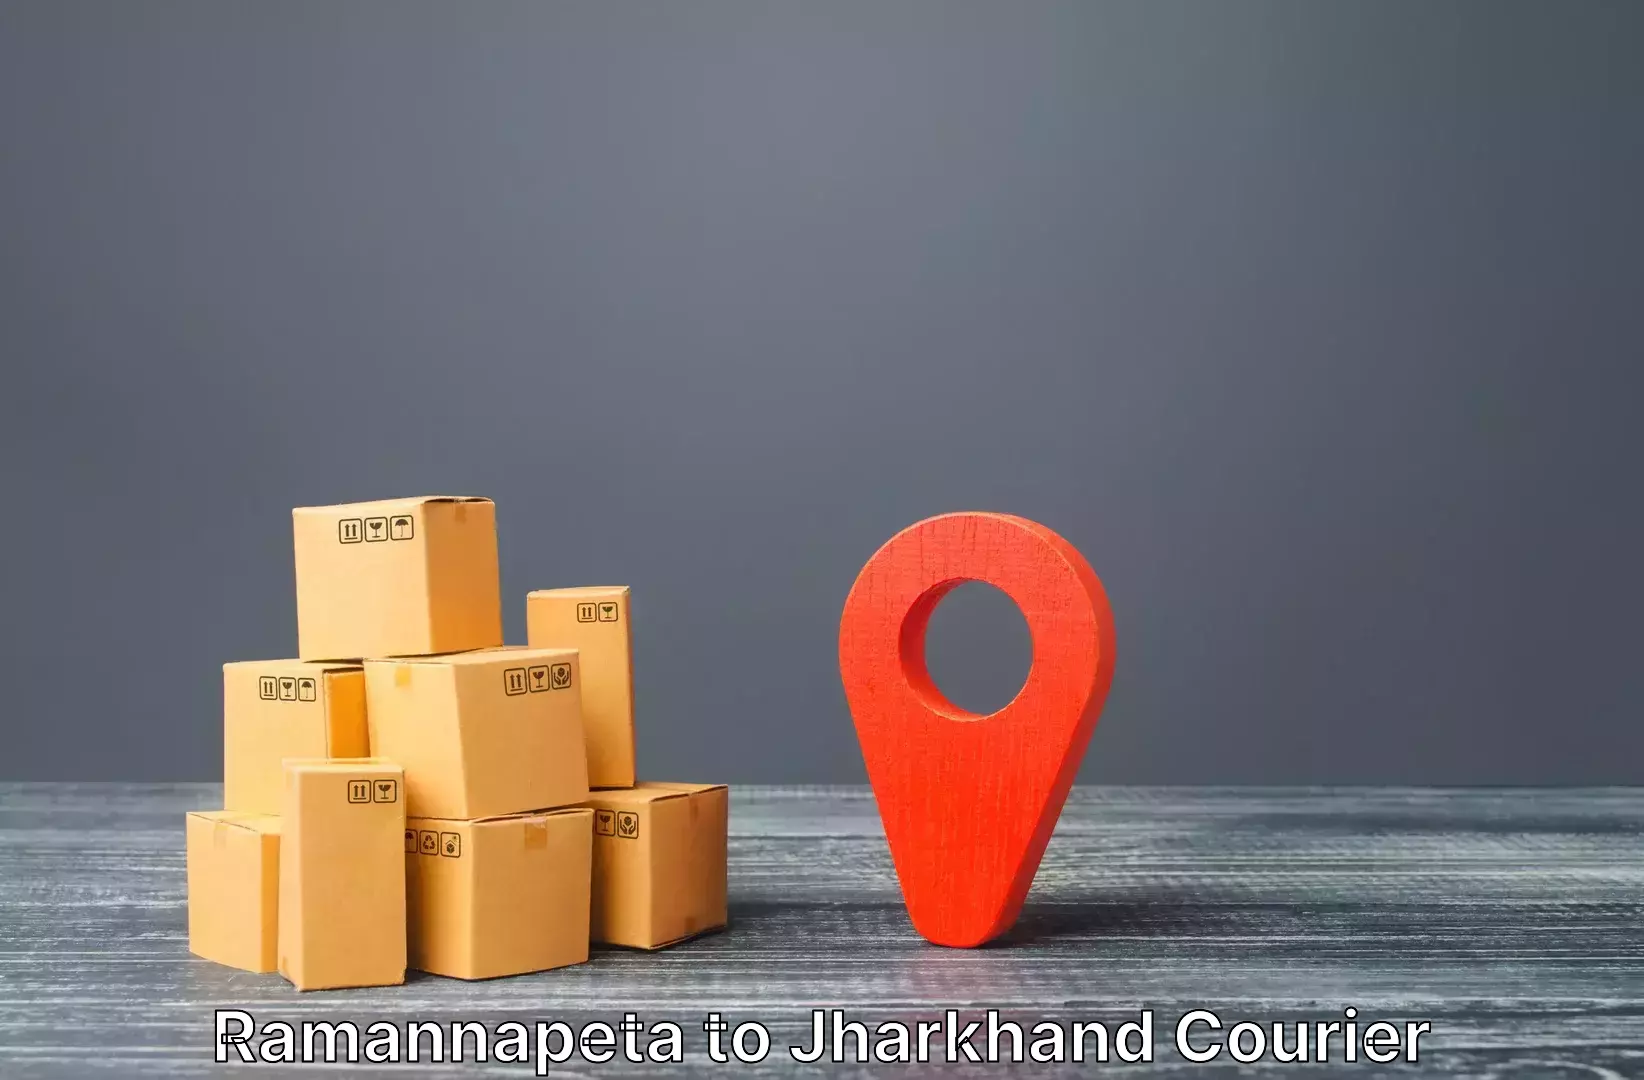 Discounted baggage transport in Ramannapeta to Jharkhand